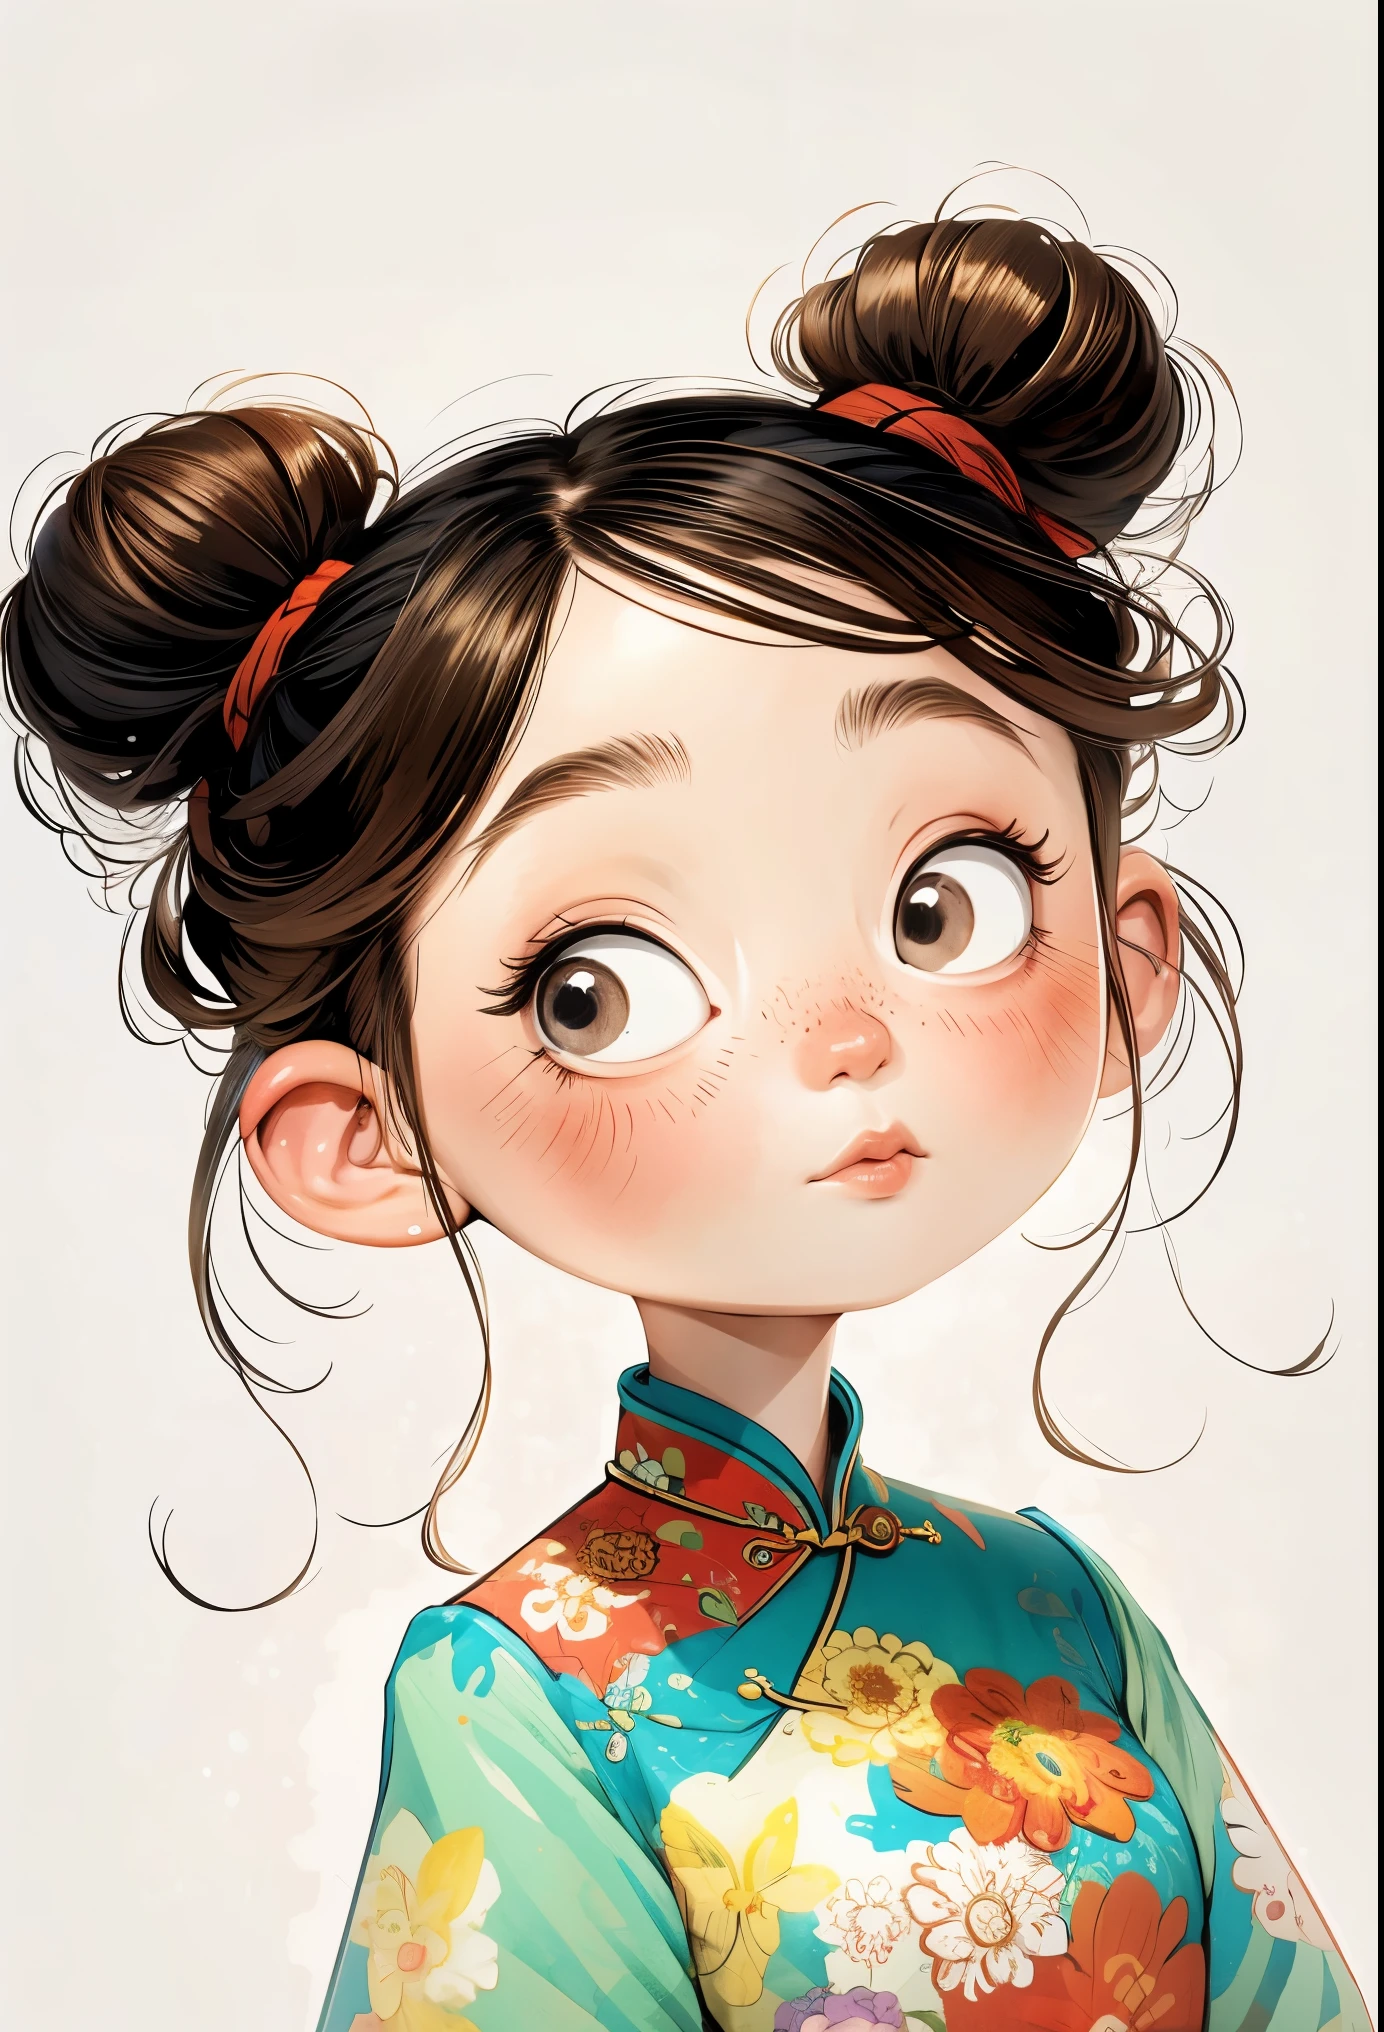 (masterpiece, best quality:1.2), watercolor painting，cartoonish character design。1 girl, alone，big eyes，Cute expression，Two little braids，cheongsam，portrait，interesting，interesting，clean lines，Leave blank，
